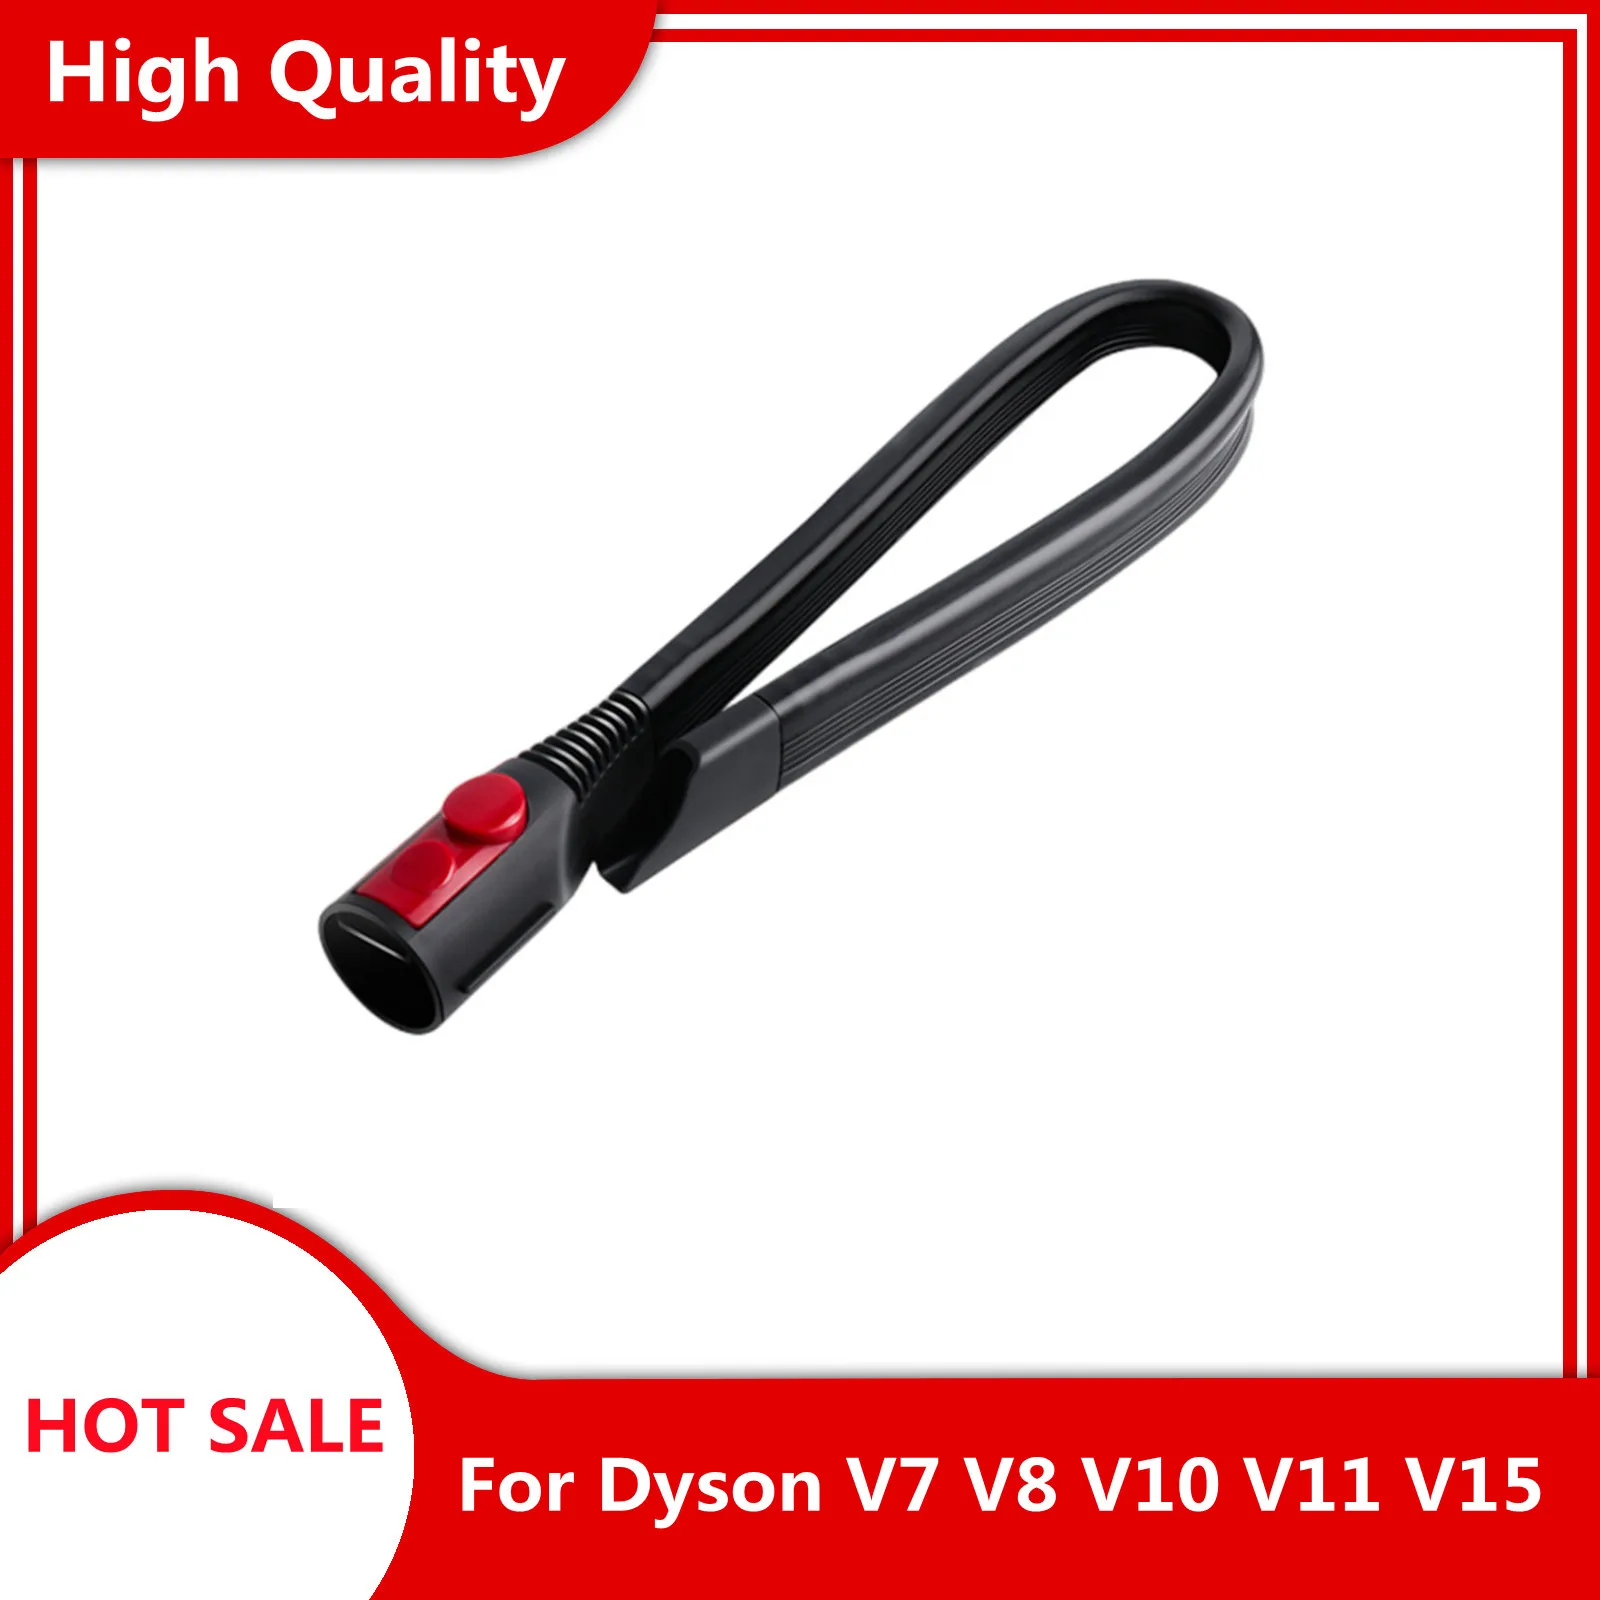 Suitable for Corners and Gaps Cleaning Flexible Crevice Tool for Dyson Cordless Vacuum Cleaners V7 V8 V10 V11 V15 1pc flat suction nozzle head for dyson v6 dc24 dc32 dc40 dc60 dc74 robot vacuum cleaner replacement parts flexible crevice tool